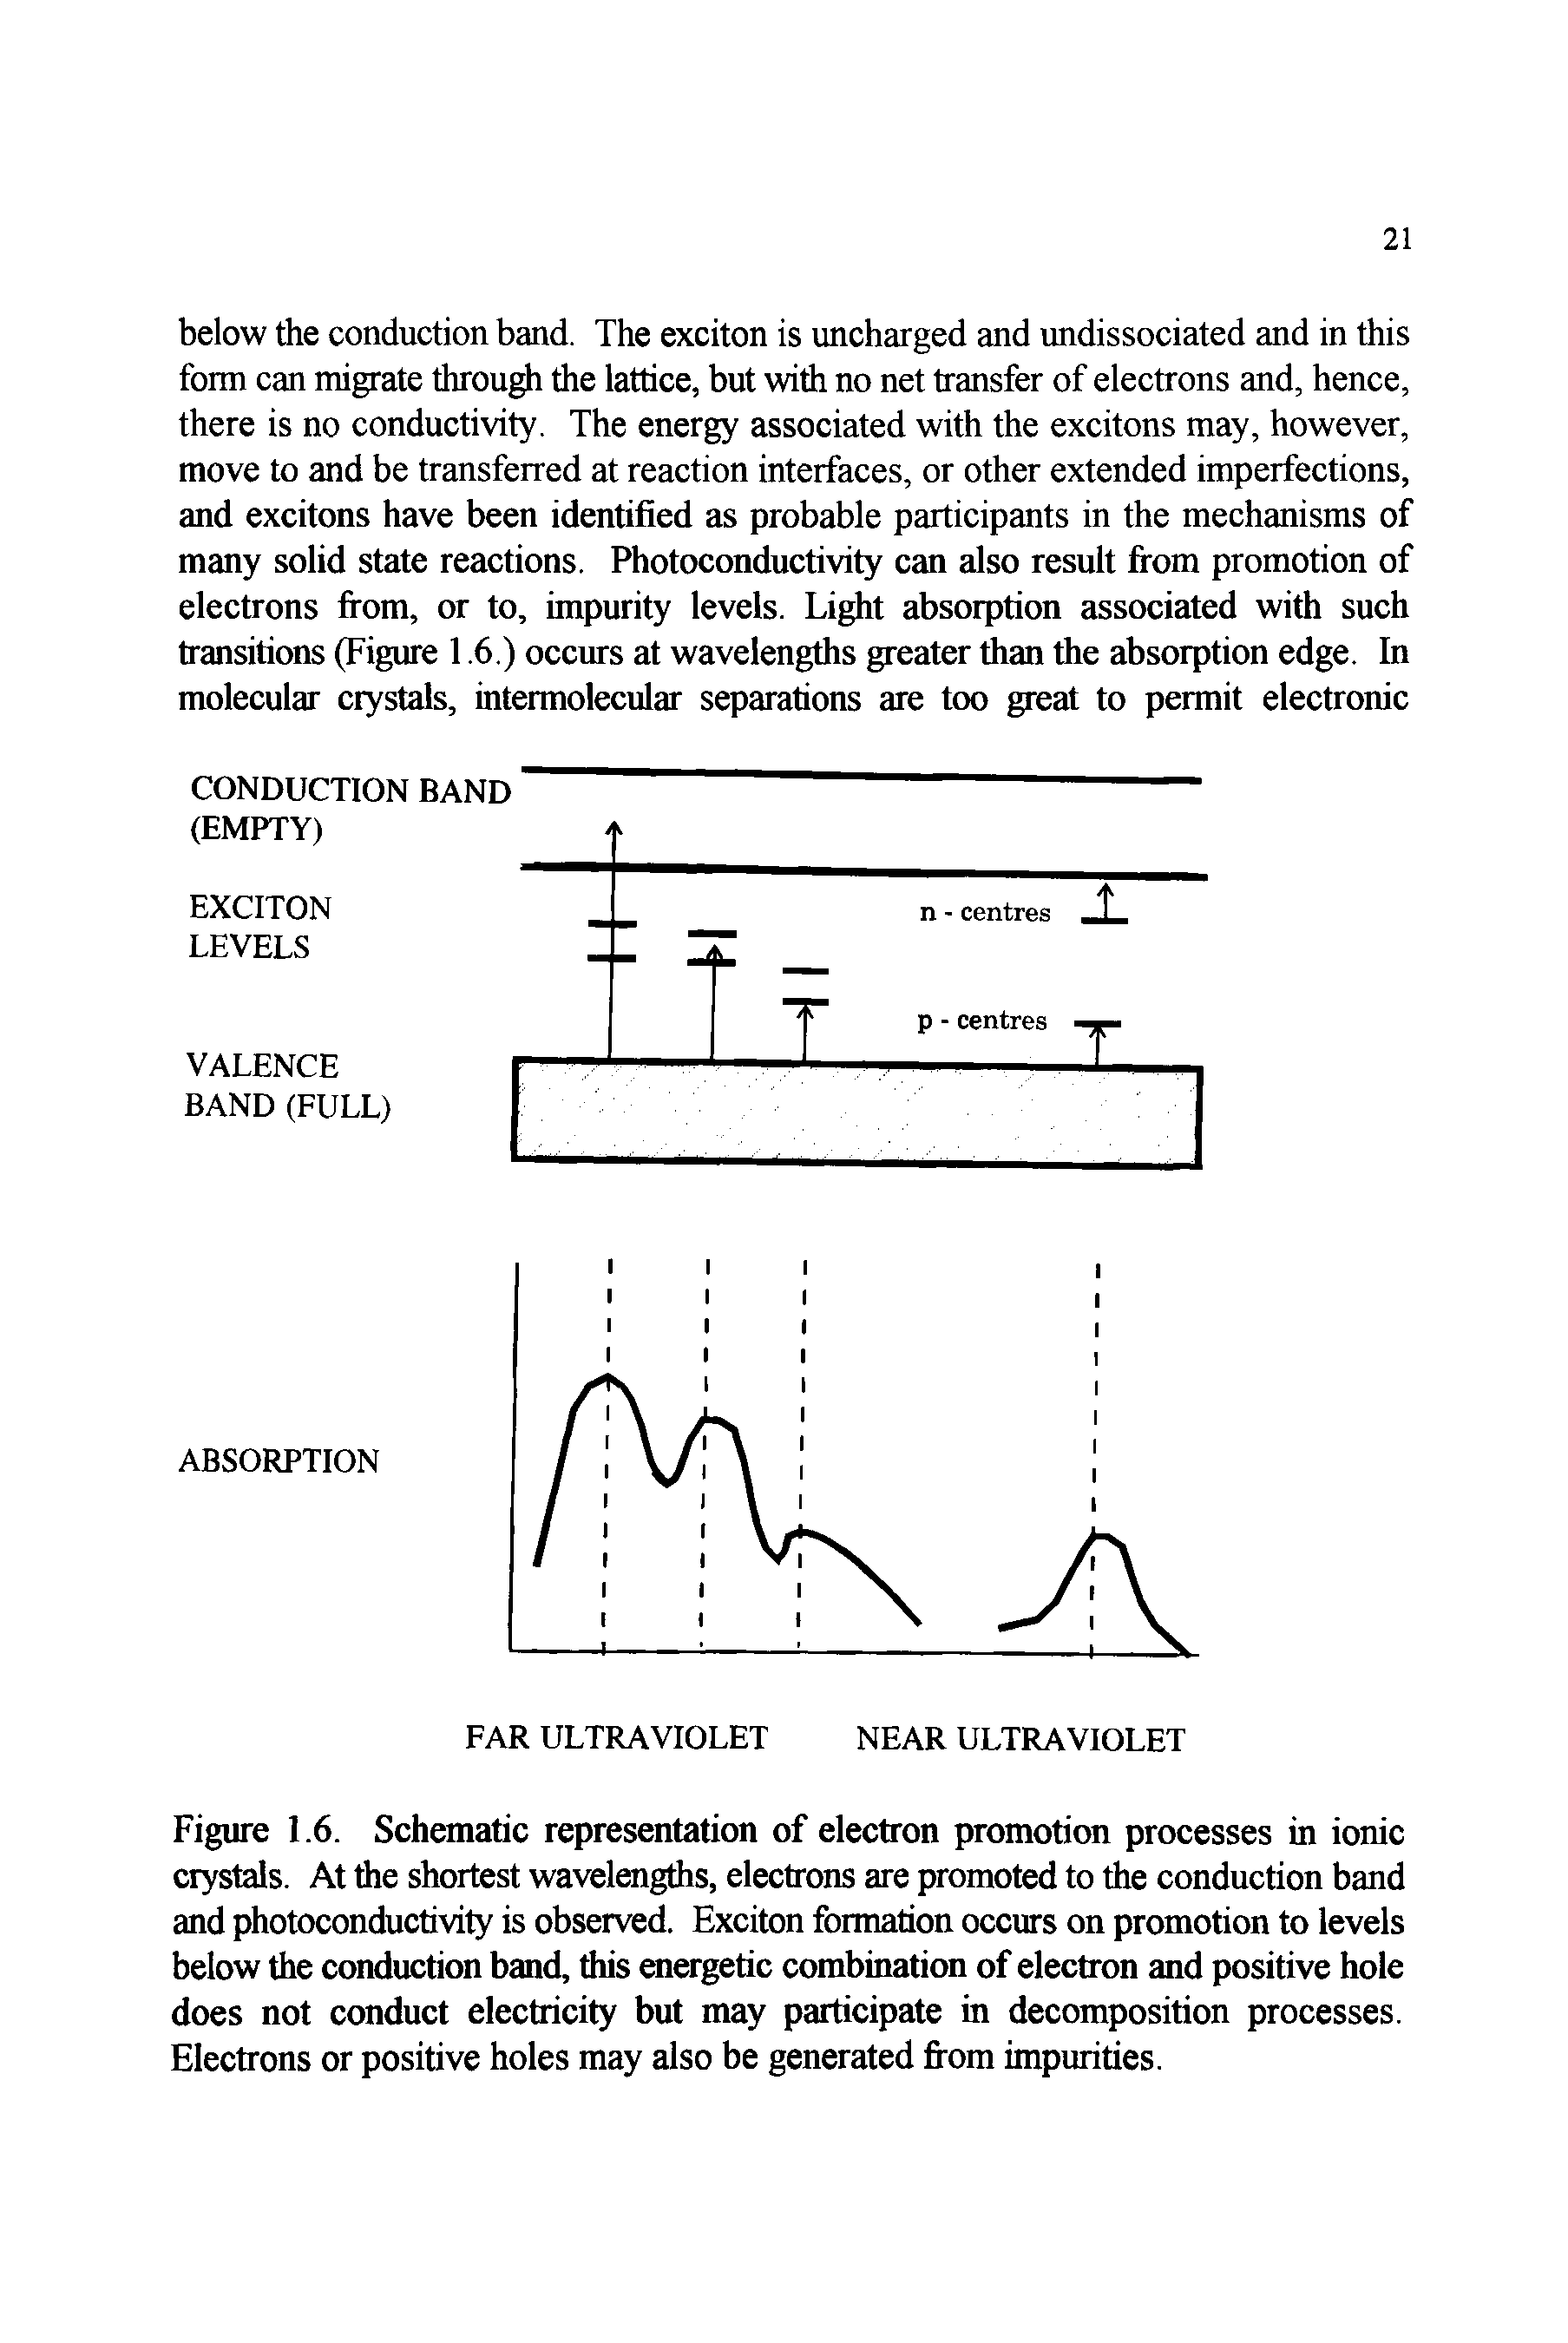 Figure 1.6. Schematic representation of electron promotion processes in ionic crystals. At the shortest wavelengths, electrons are promoted to the conduction band and photoconductivity is observed. Exciton formation occurs on promotion to levels below the conduction band, this energetic combination of electron and positive hole does not conduct electricity but may participate in decomposition processes. Electrons or positive holes may also be generated from impurities.